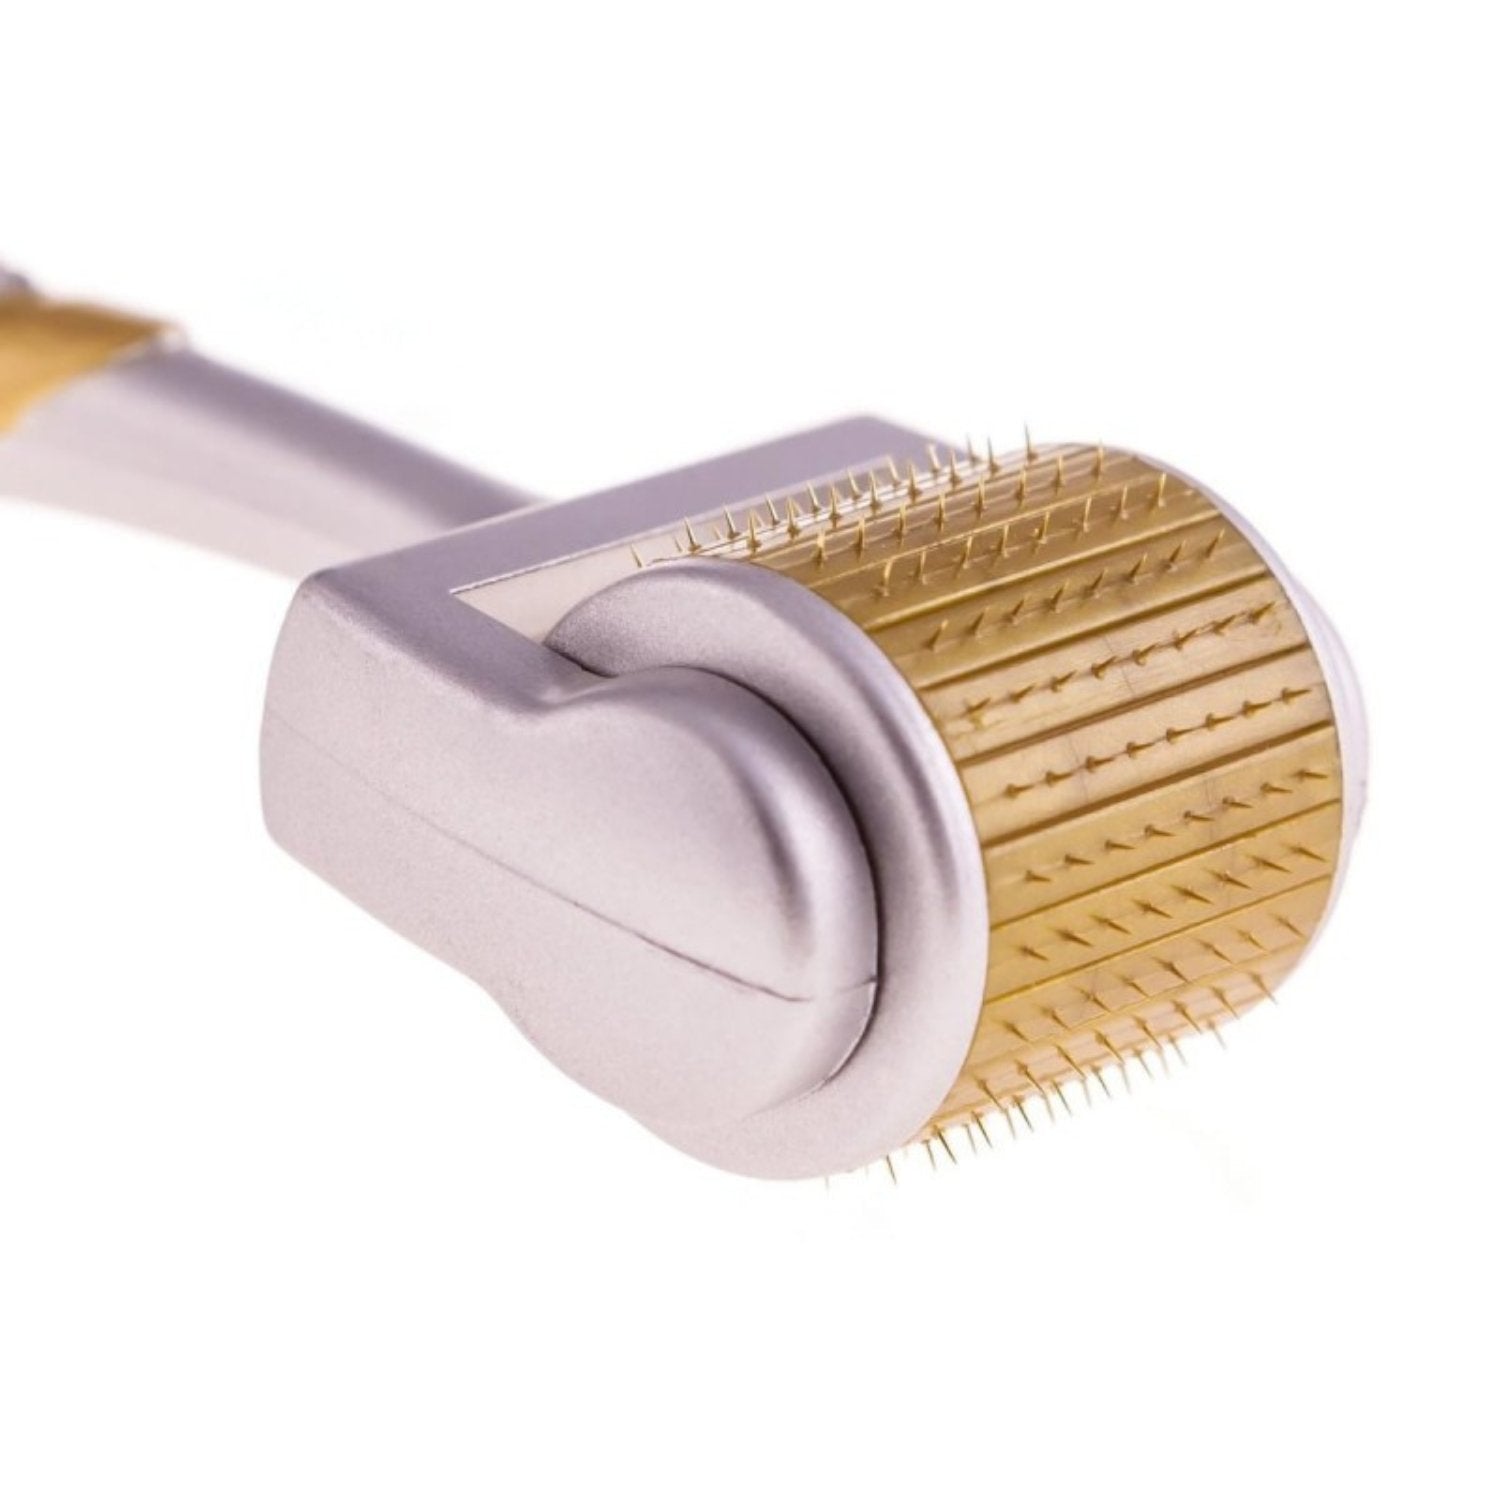 GTS 192 Gold Derma Roller 0.5mm - Dr. Pen Store - Dr. Pen Buy Genuine Dr Pen Products with Trust